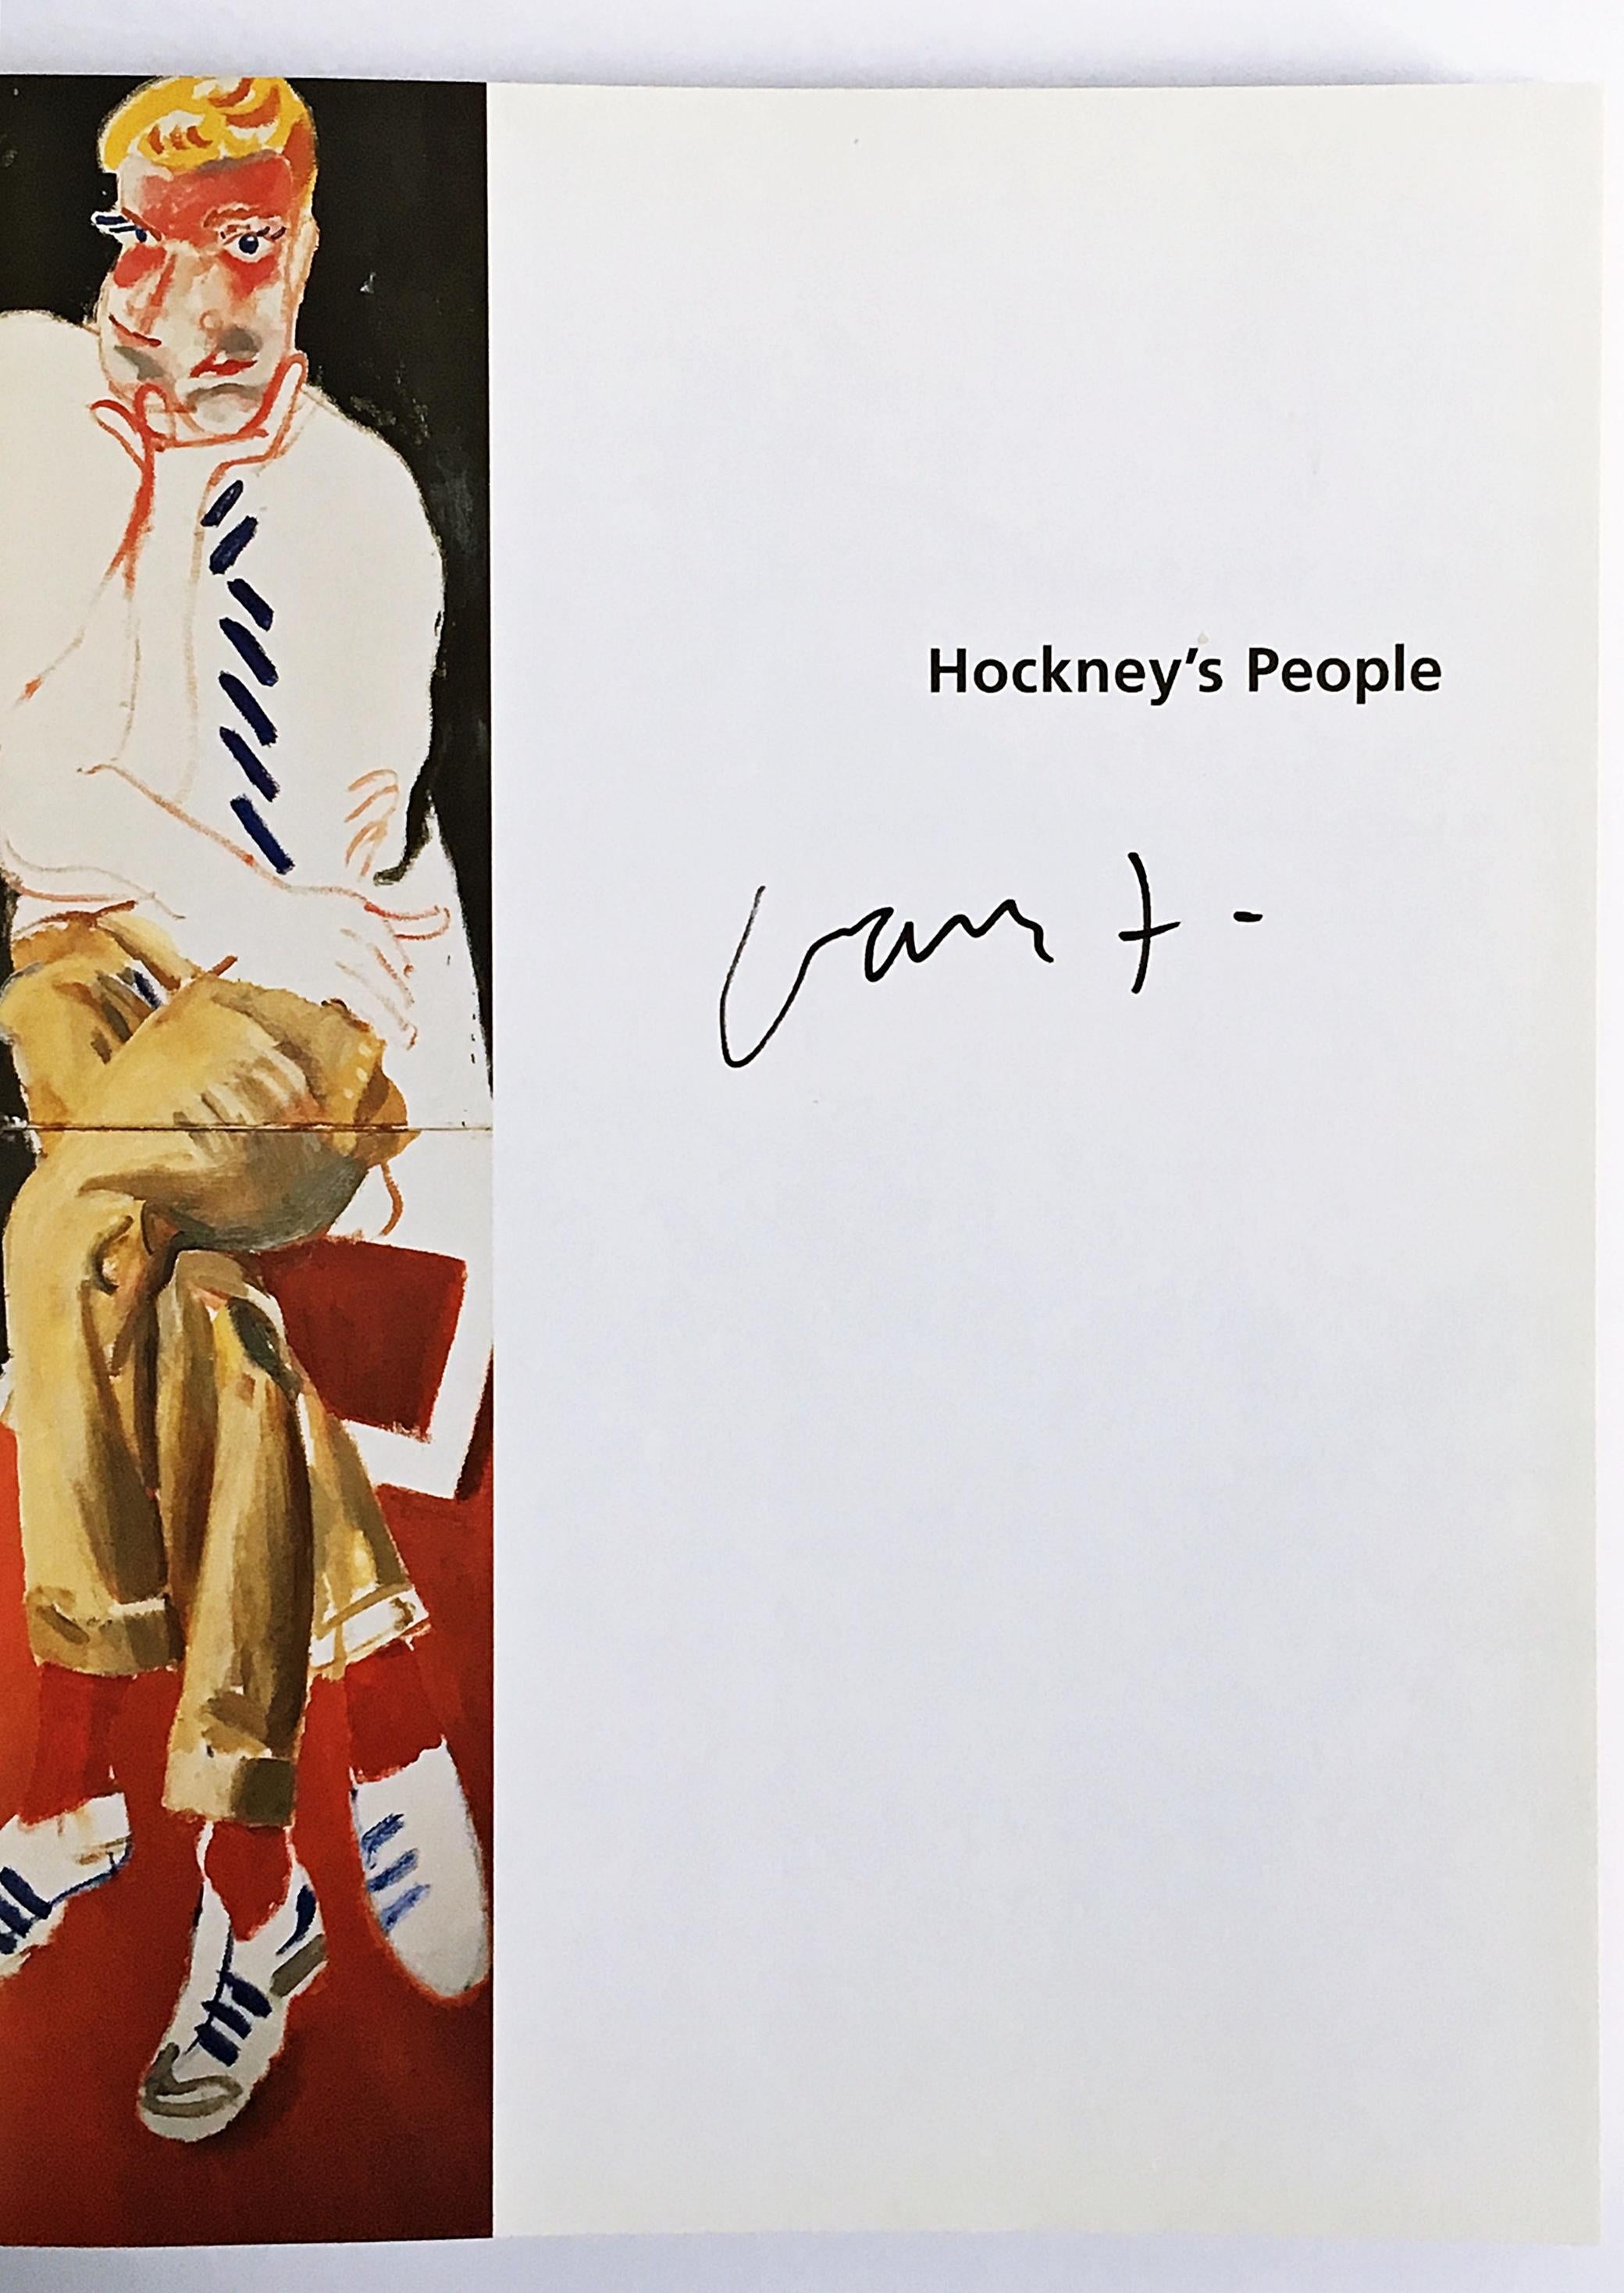 David Hockney
Hockney's People (Hand Signed), 2003
Hardback Monograph
Hand signed by David Hockney in black marker on the title page of the book.
12 x 9 3/4 inches
This book is scarce when hand signed by the artist.  David Hockney signed this book